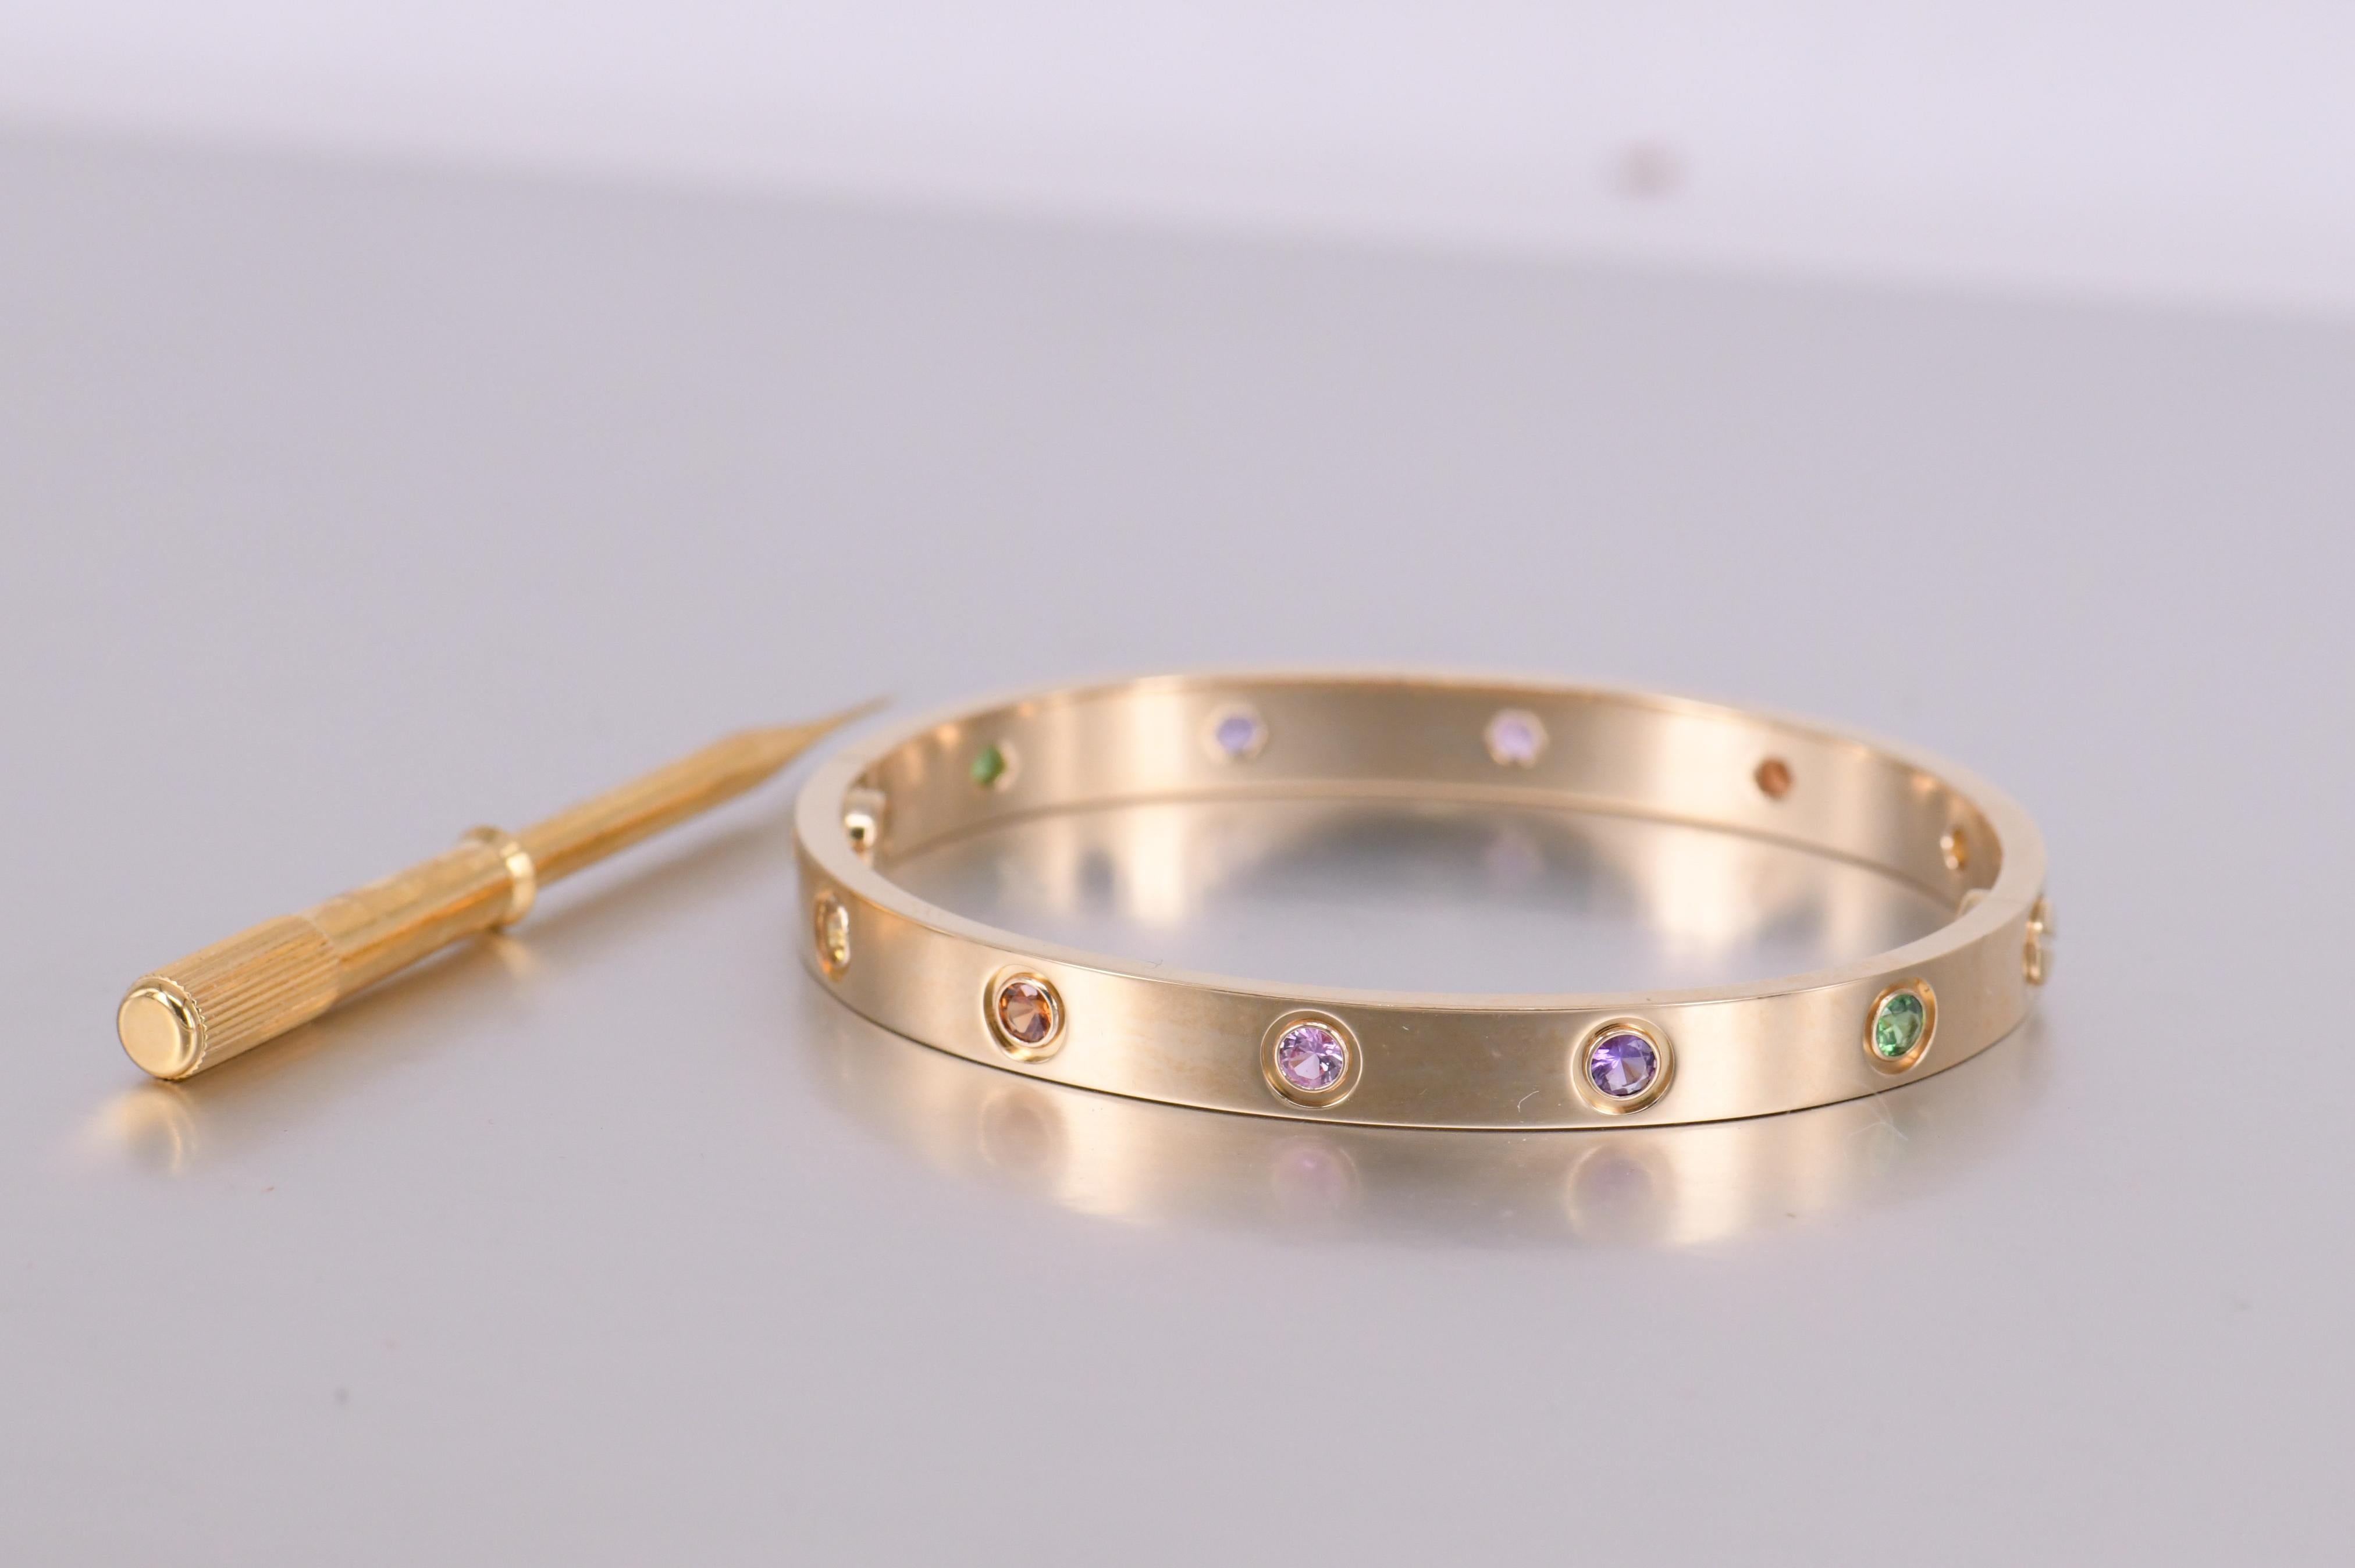 LOVE bracelet, 18K rose gold, set with 2 pink sapphires, 2 yellow sapphires, 2 green garnets, 2 orange garnets, and 2 amethysts. Comes with a screwdriver and Box.  Size 16 

__________________________________

Dandelion Antiques Code	AT-0690
Brand	 